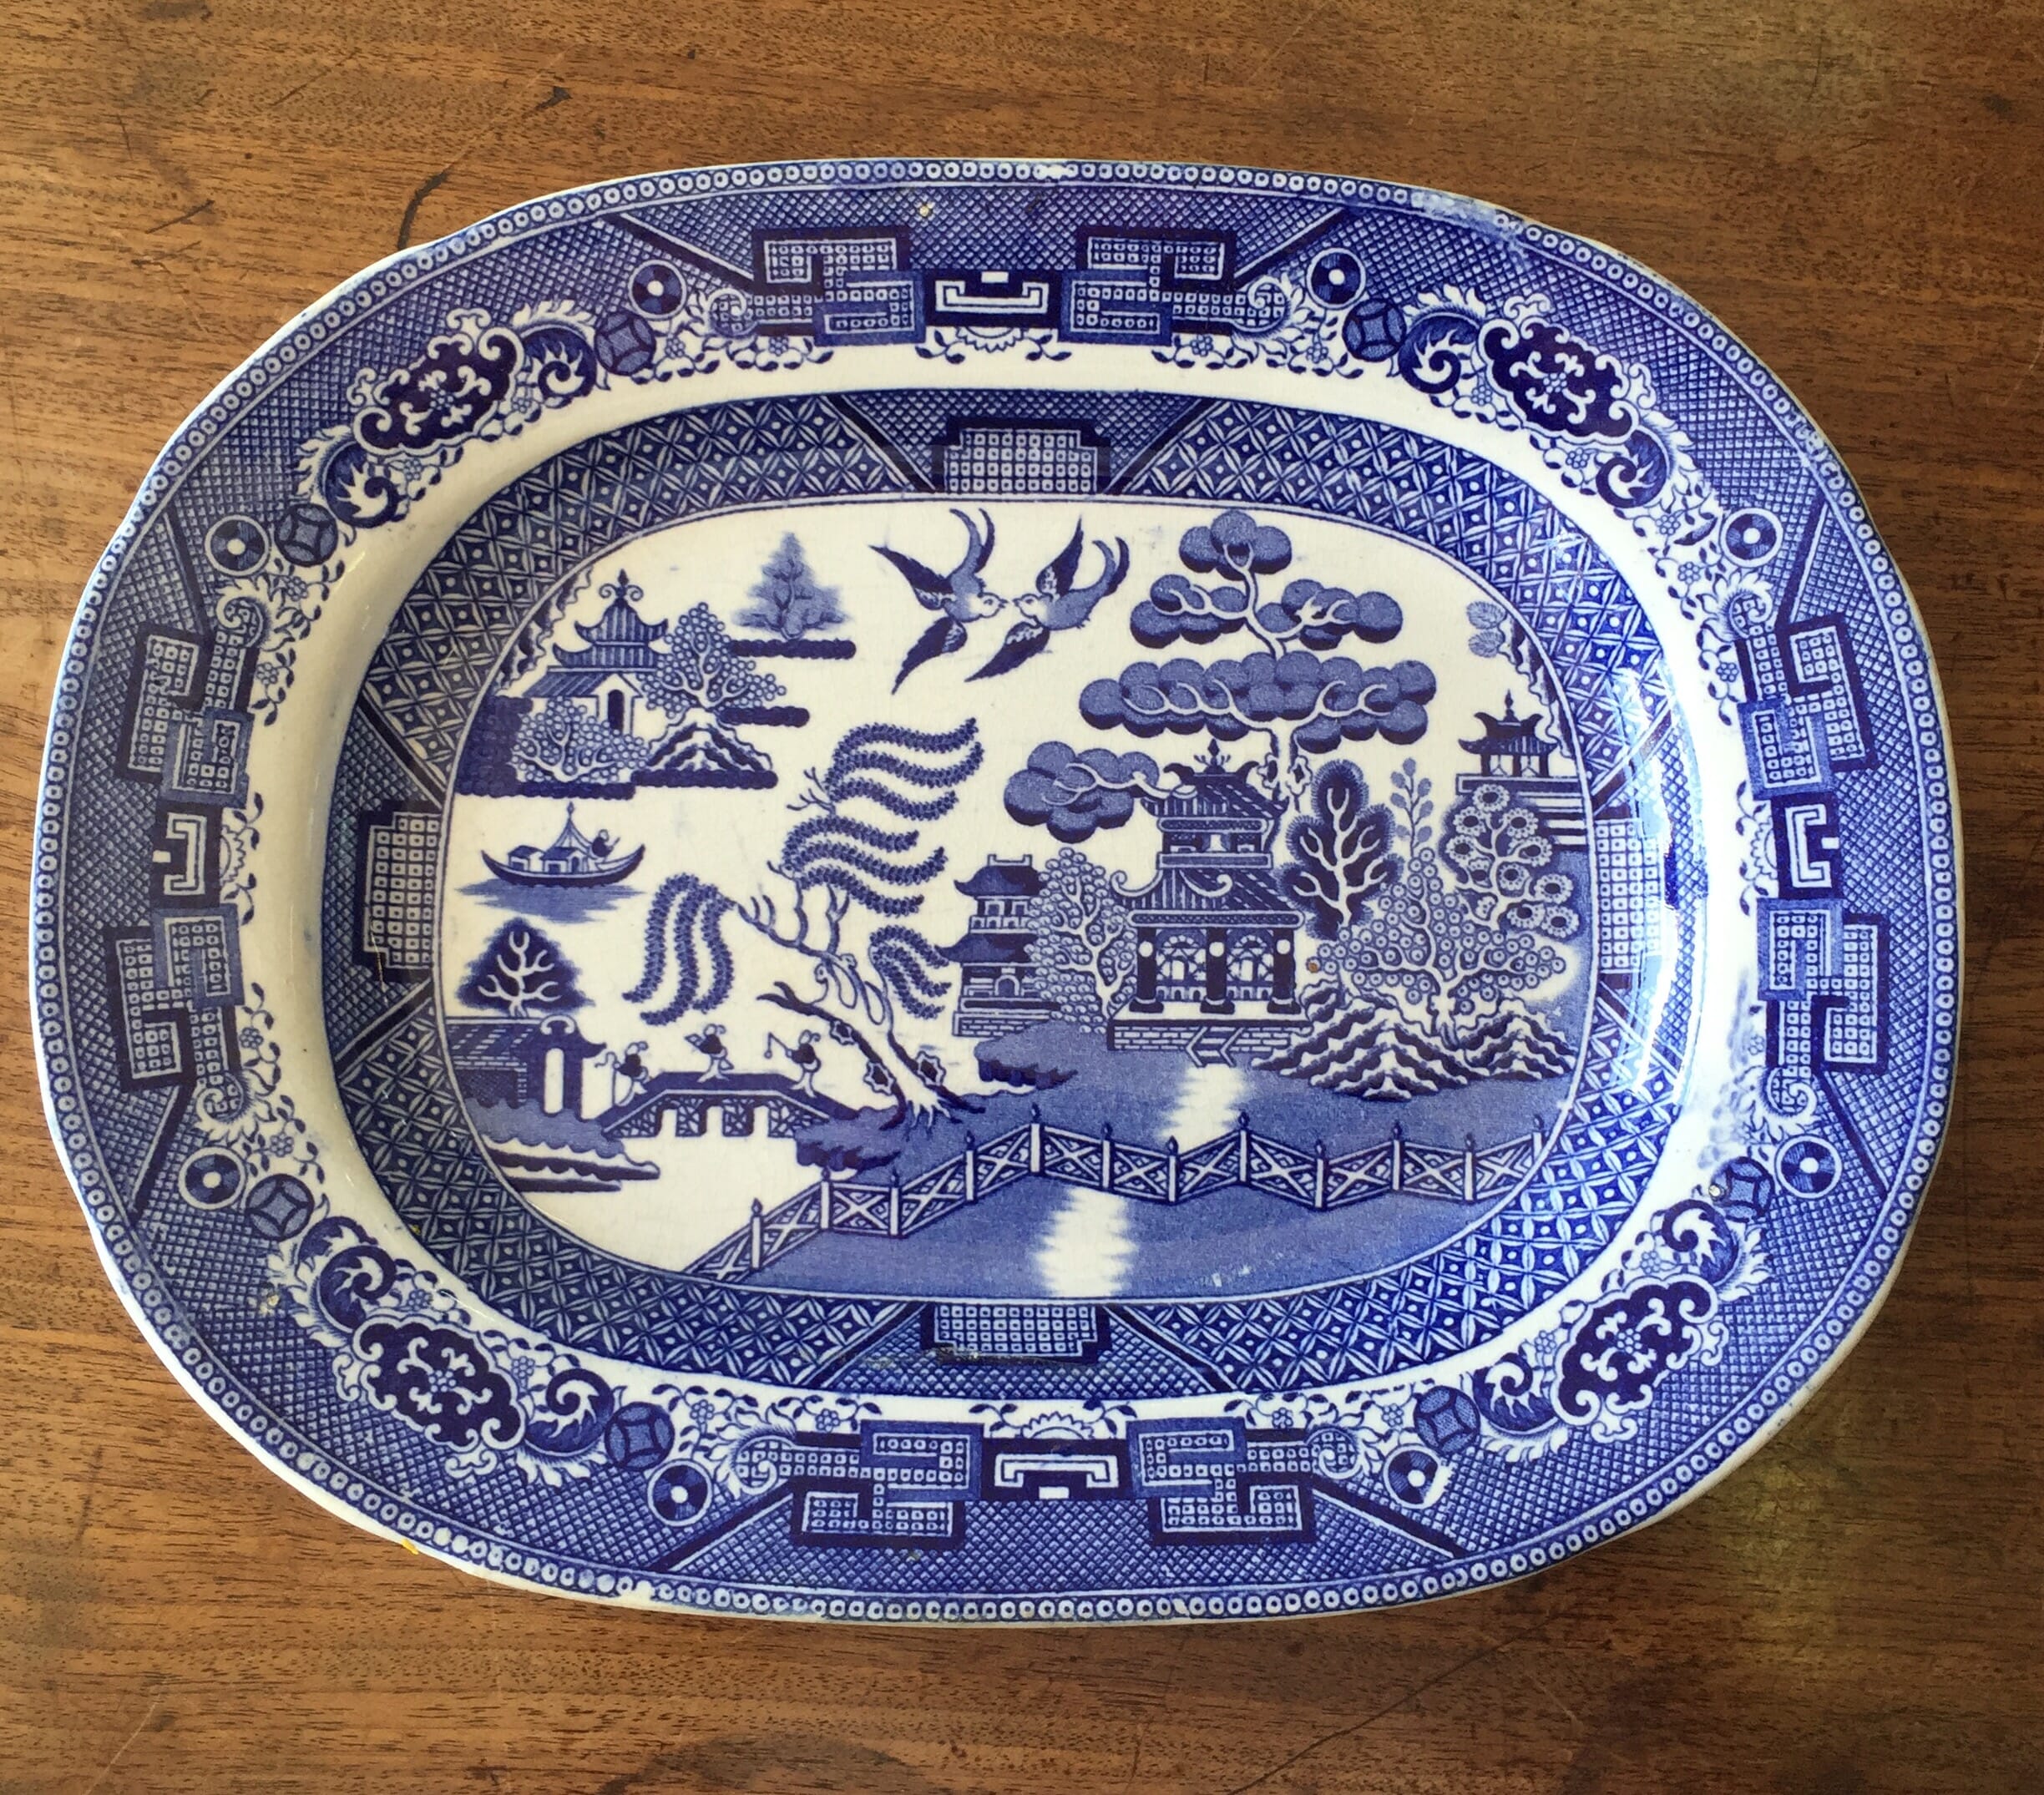 Challinor & Co pottery meat platter, Willow Pattern, c.1853-60 -0